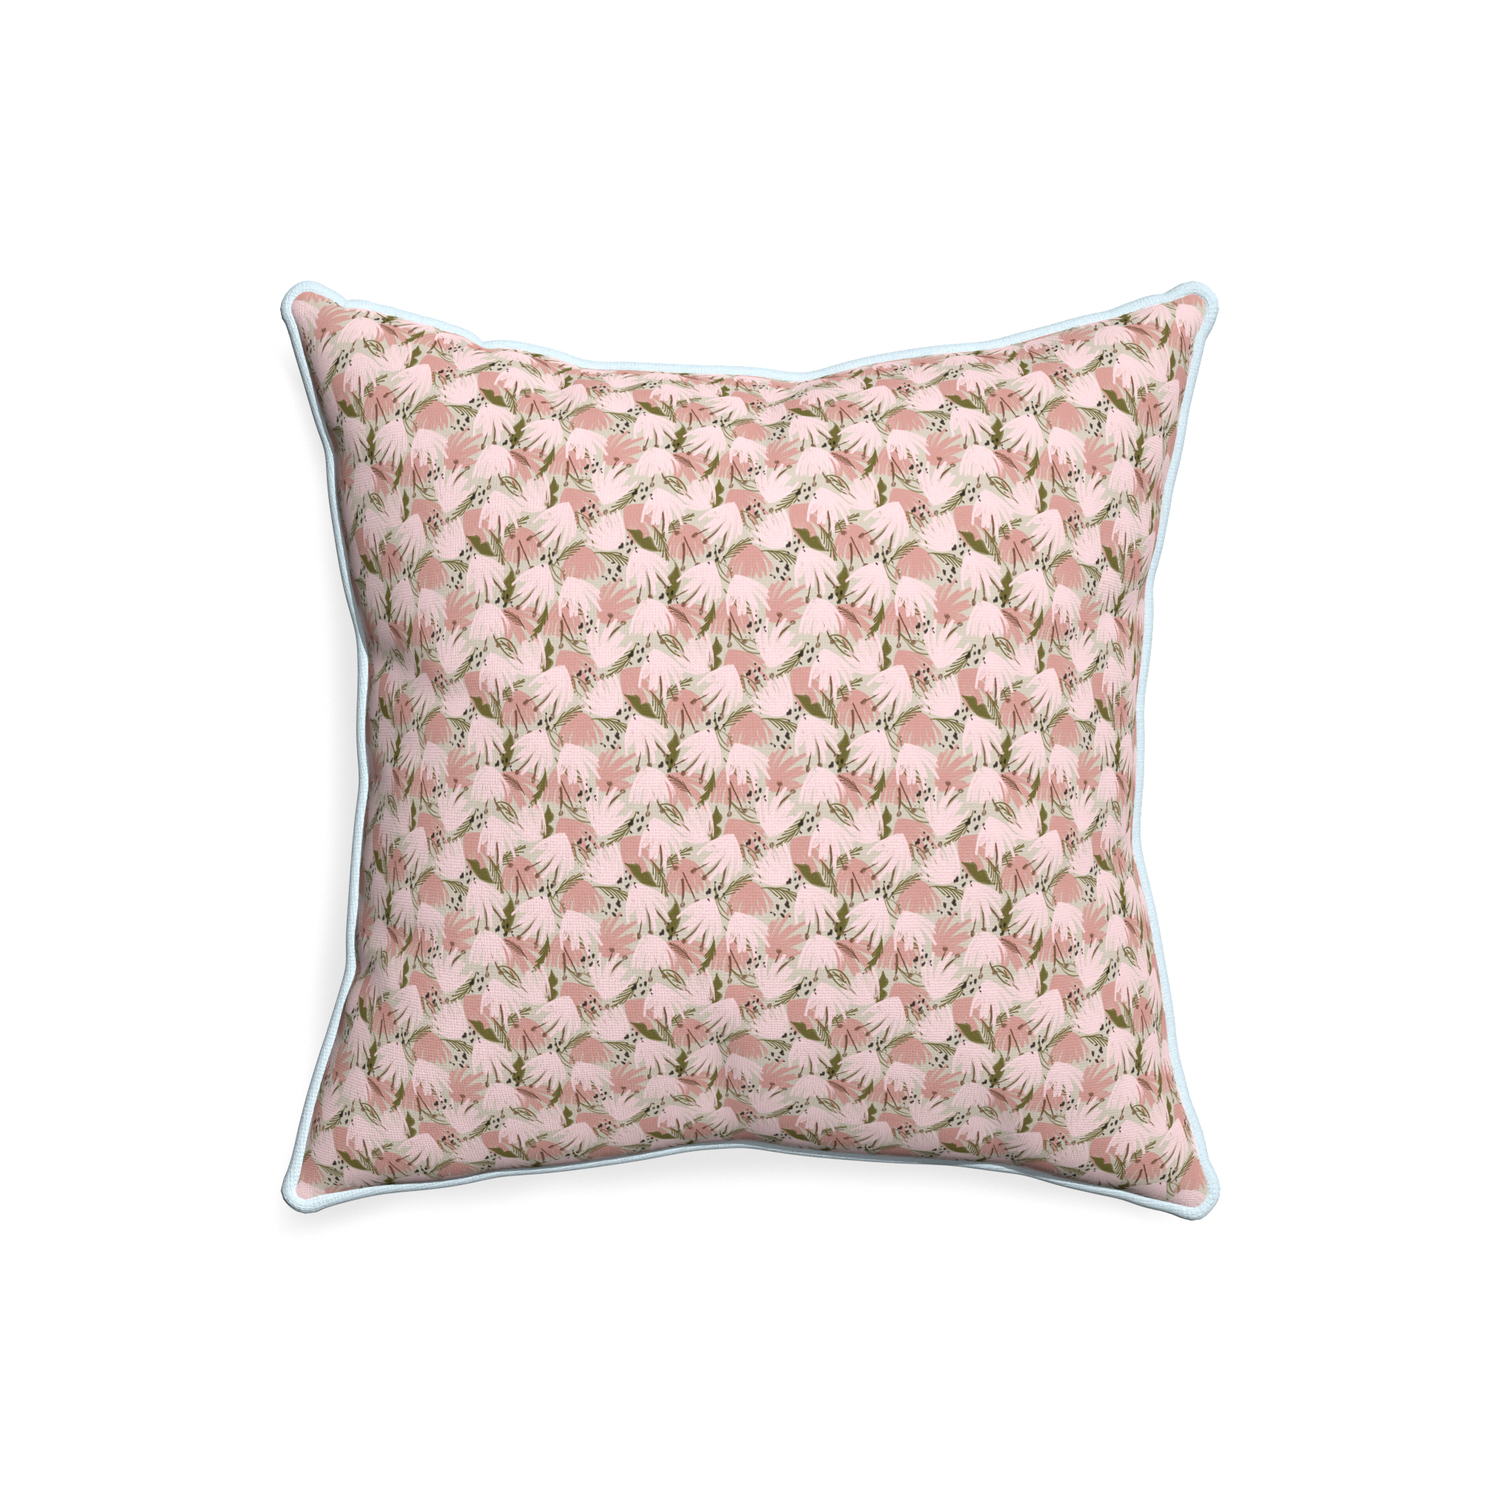 20-square eden pink custom pink floralpillow with powder piping on white background